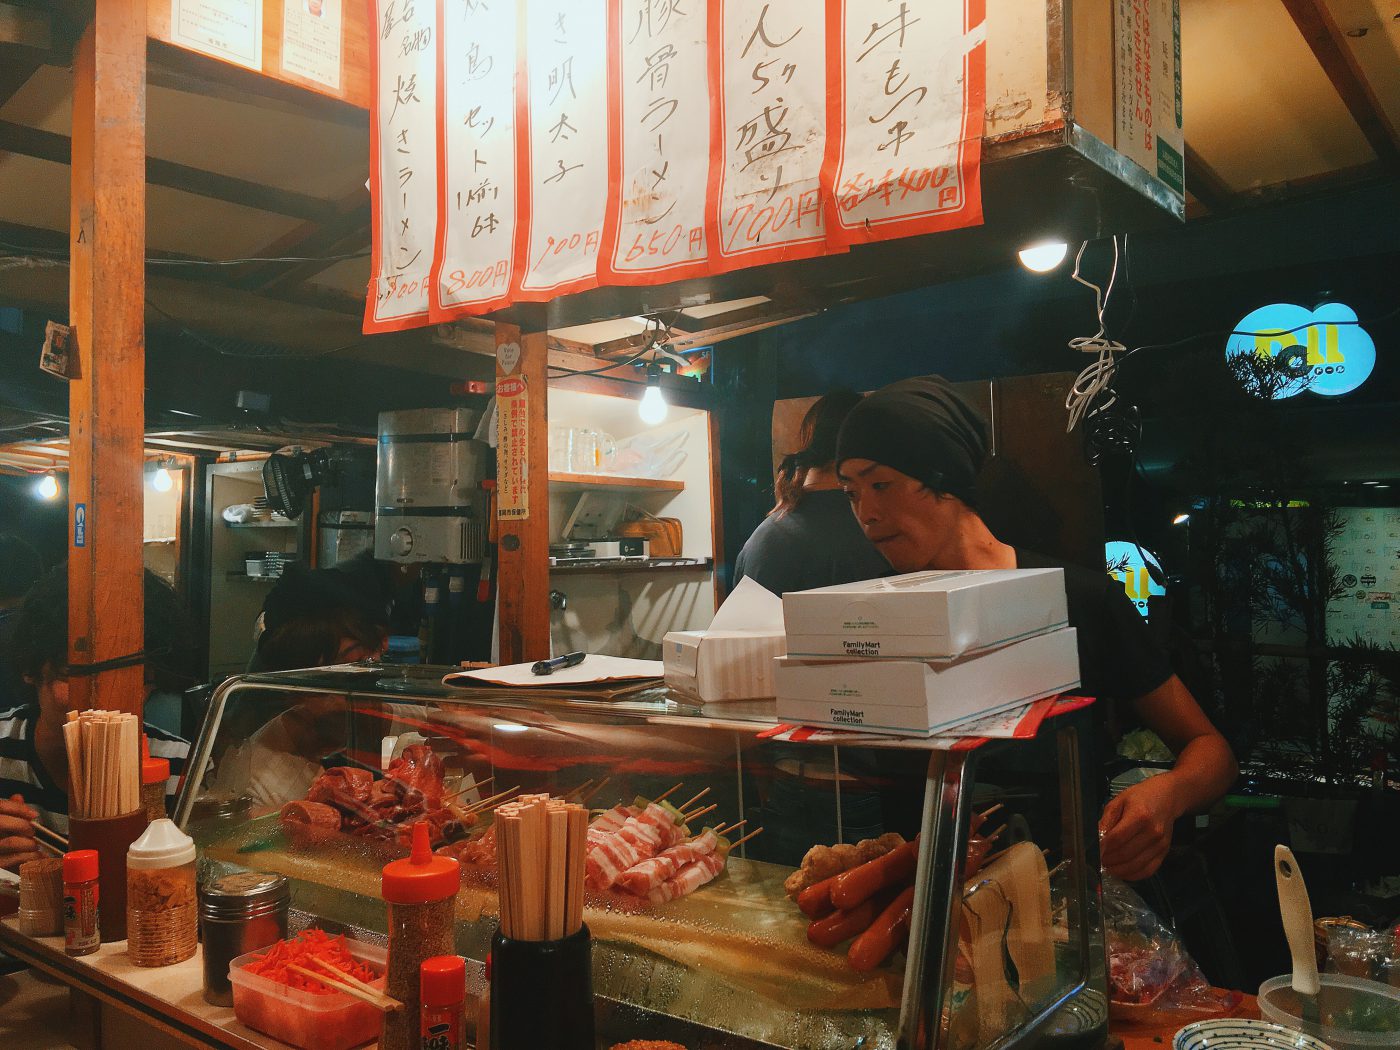 Yatai stalls are often manned by young Japanese men